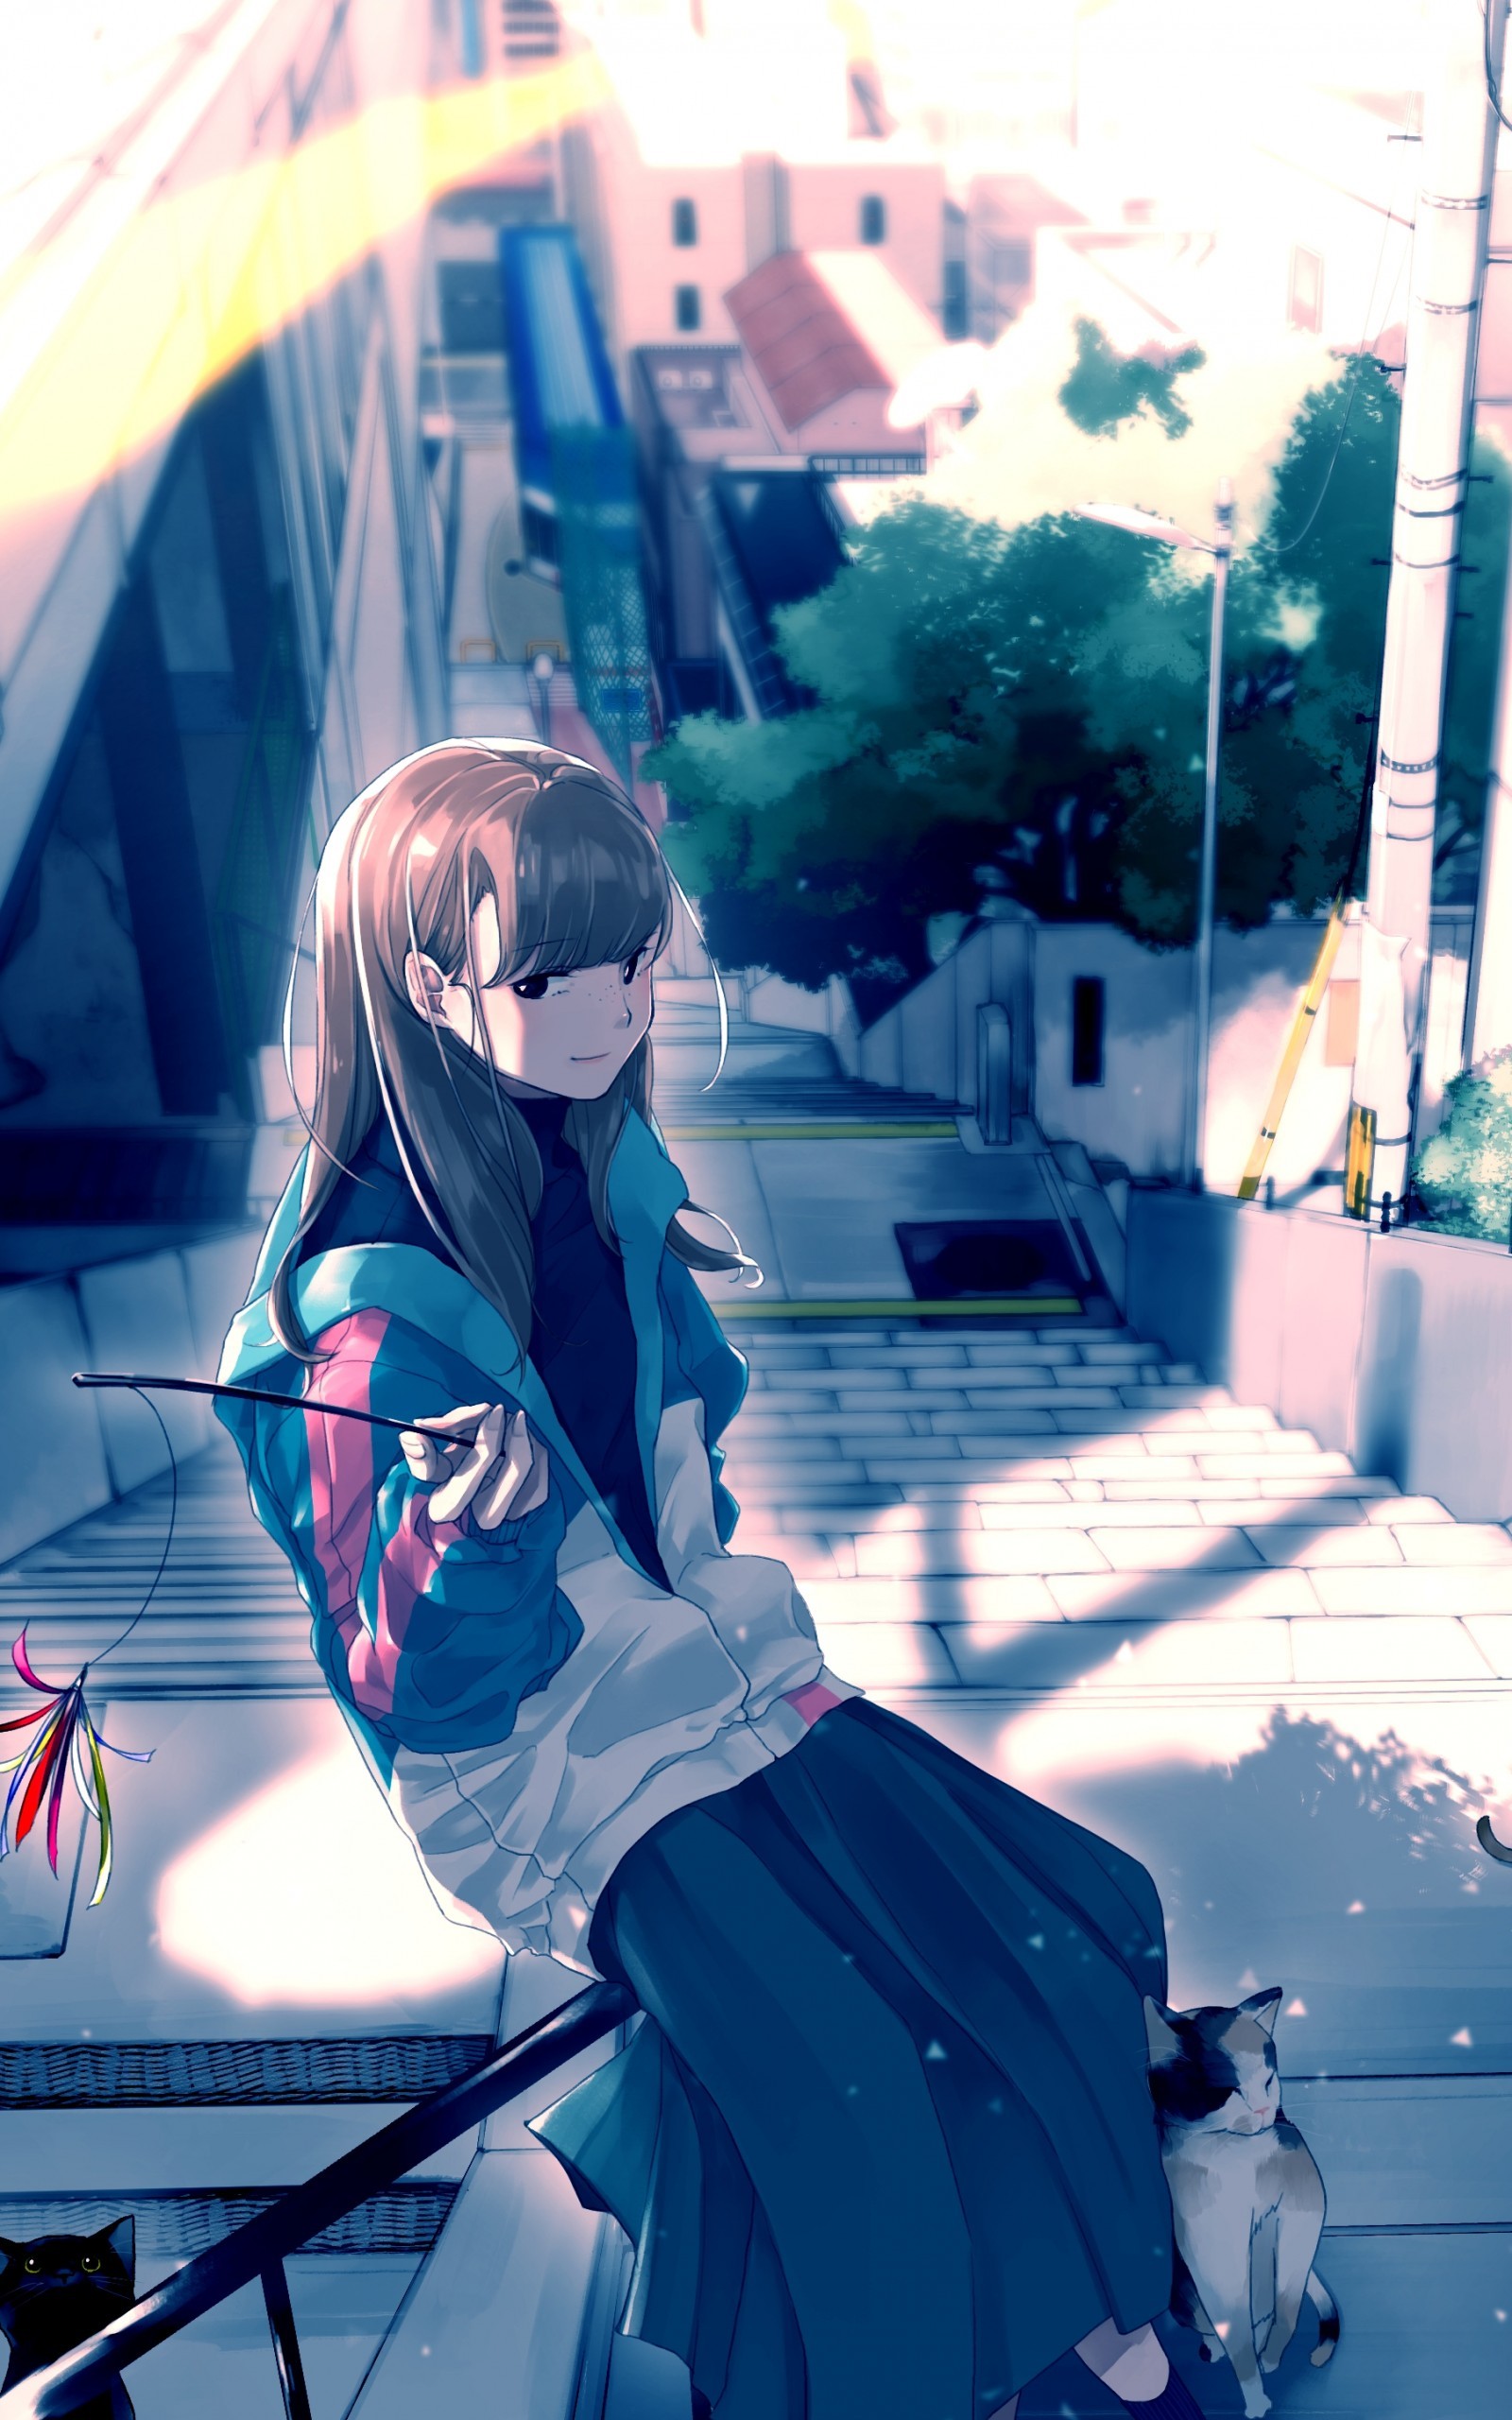 Download 1600x2560 Anime Girl, Jacket, Cats, Stairs, Daylight Wallpaper for Google Nexus 10